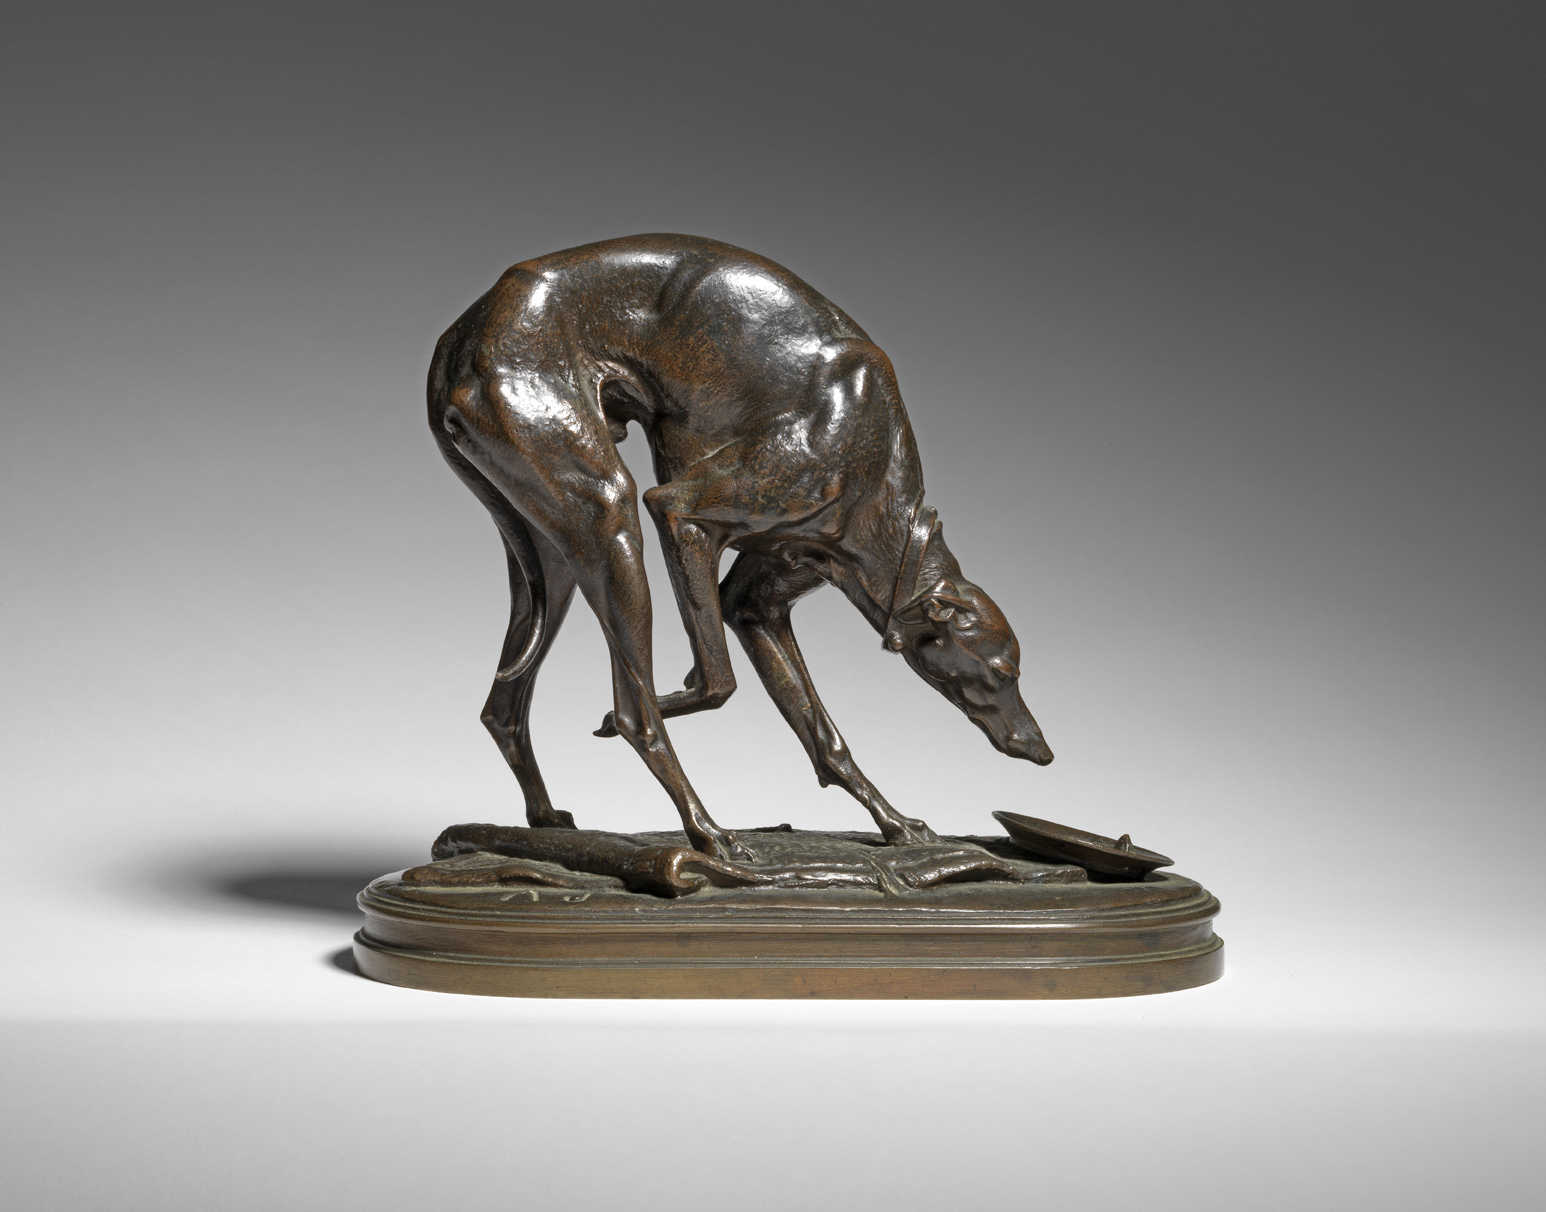 Whippet drinking from a Bowl, c. 1880